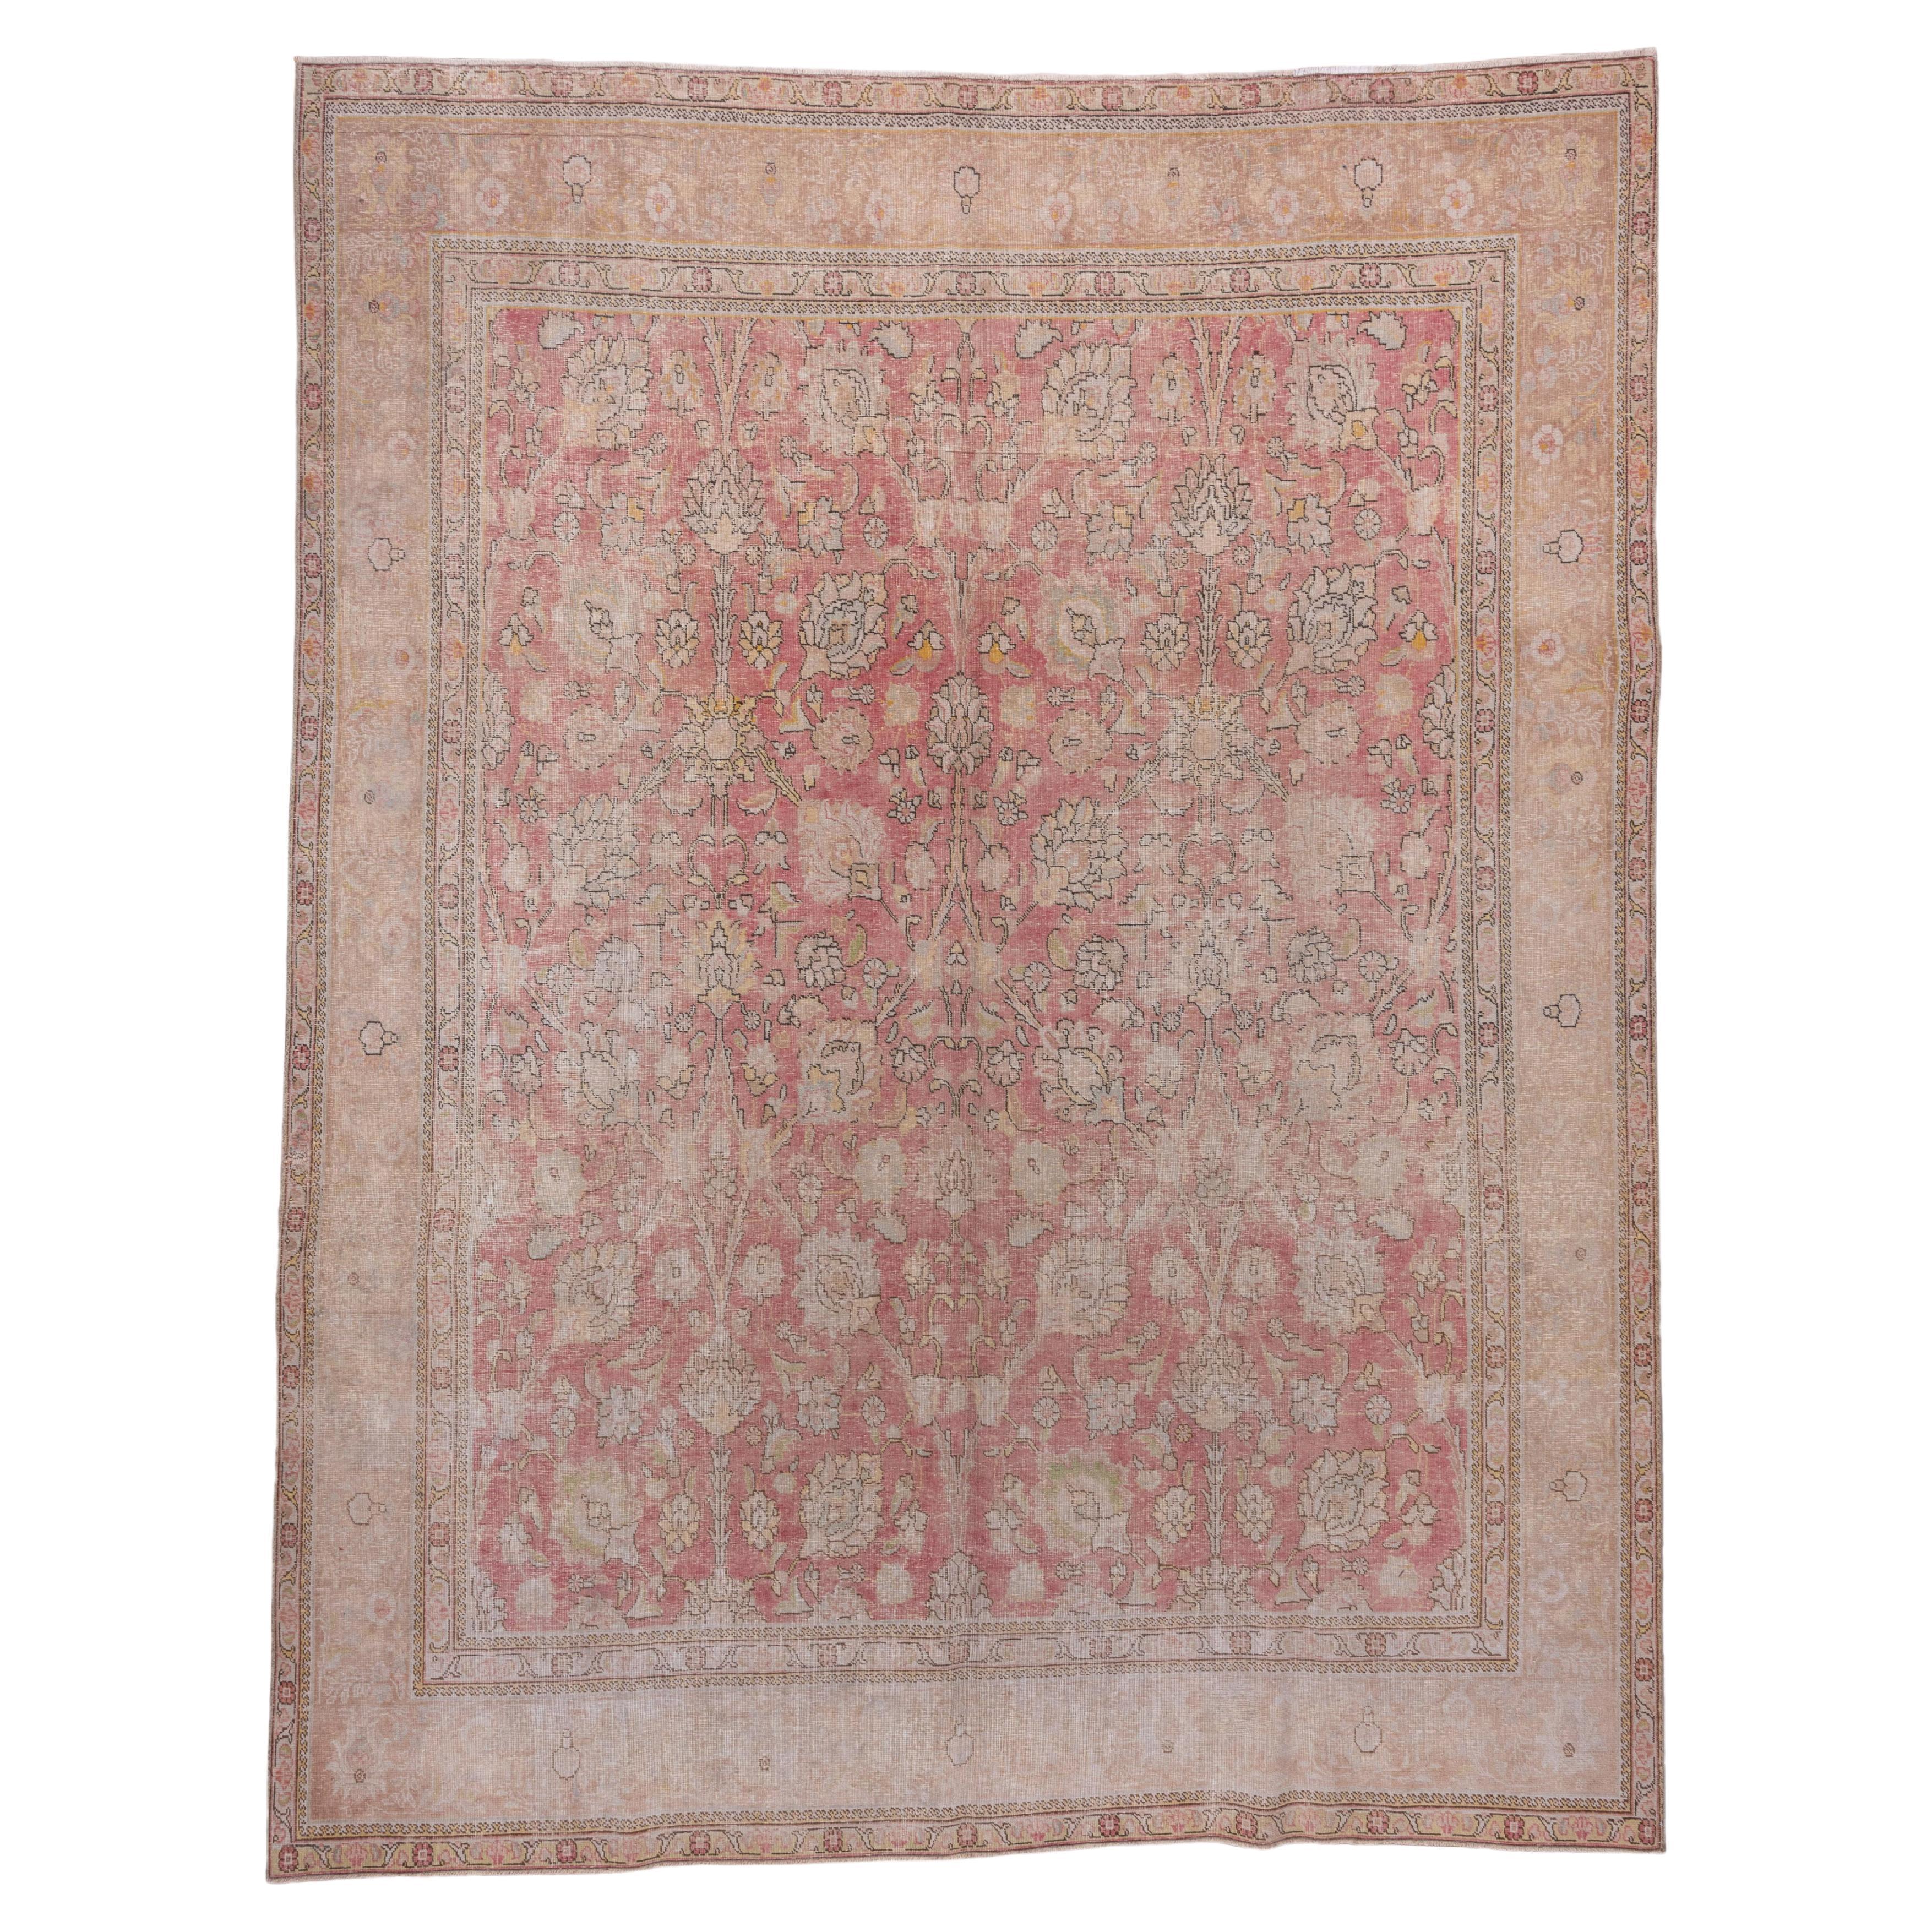 Eliko Rugs by David Ariel Antique Tabriz Rug Pink Allover Field & Yellow Accents For Sale